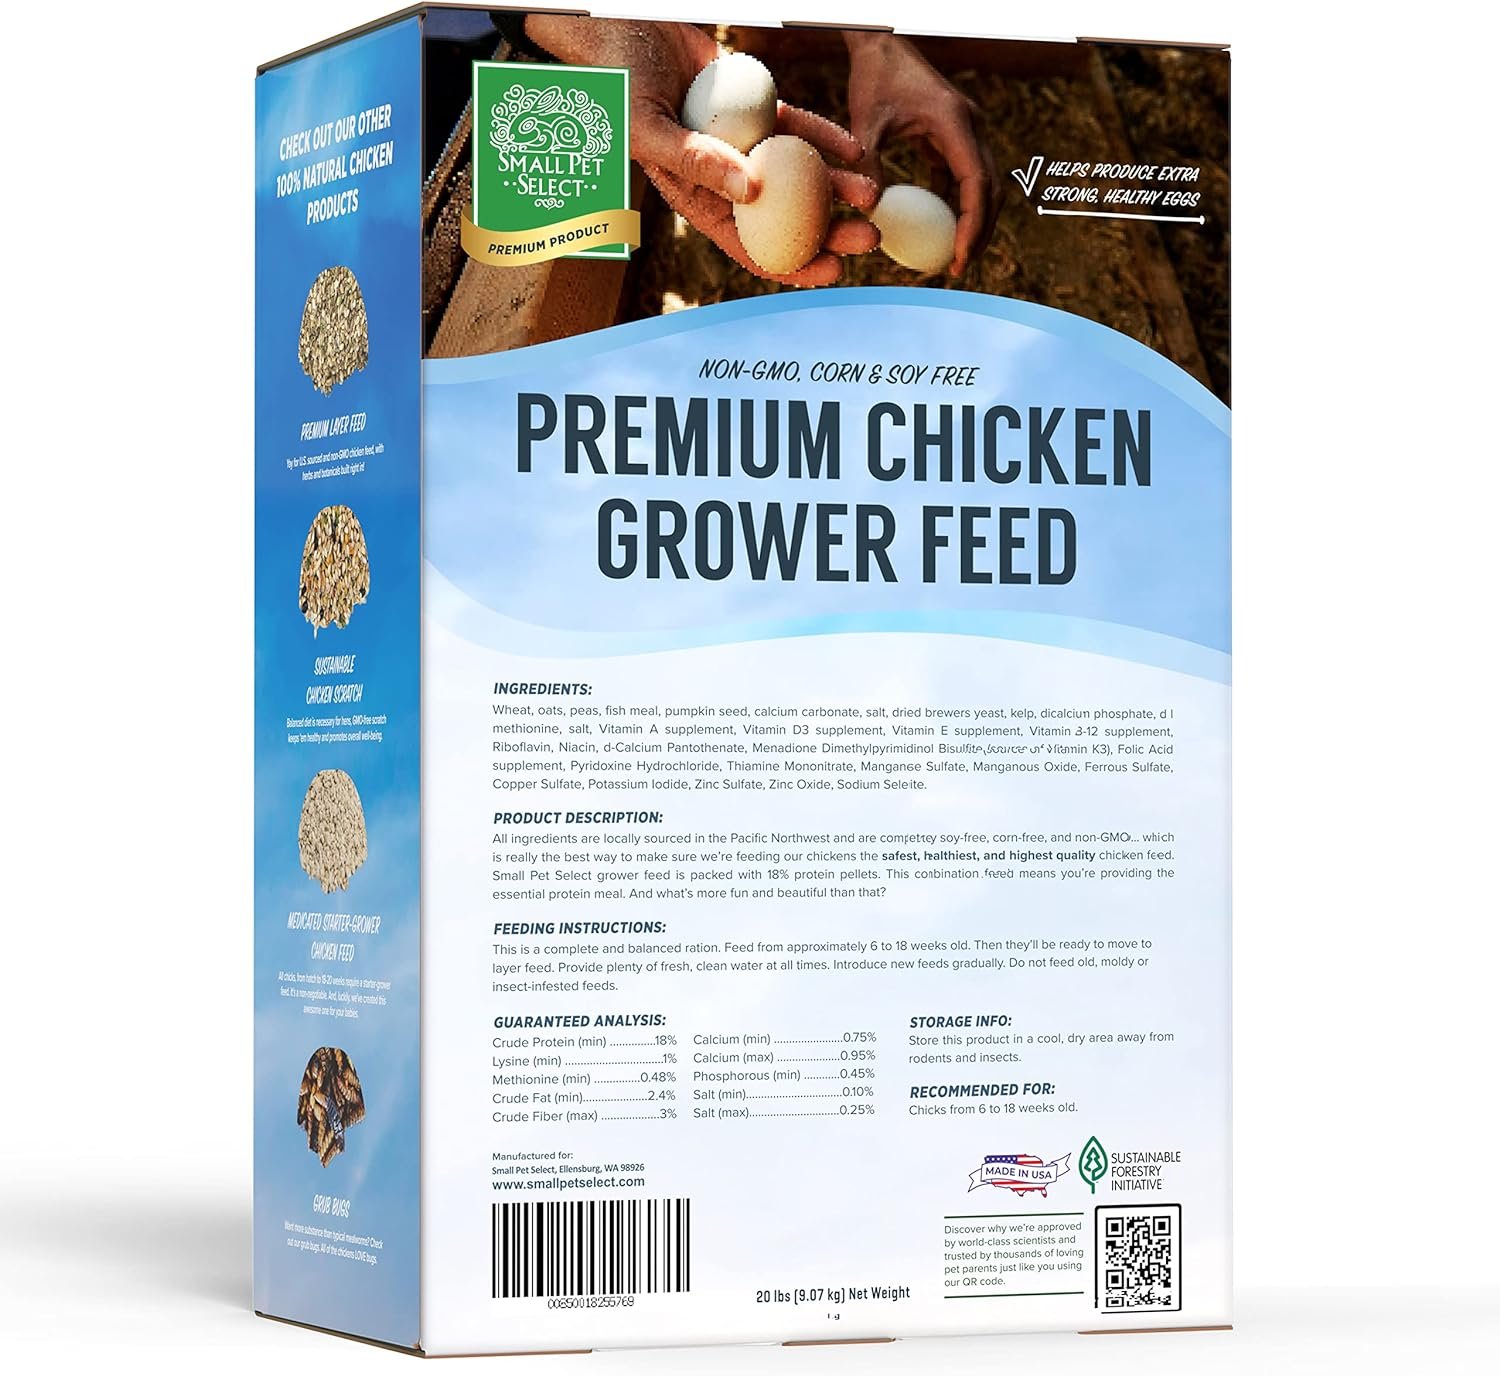 Small Pet Select - Chicken Grower Feed, Non-GMO, Corn  Soy Free, 20lb